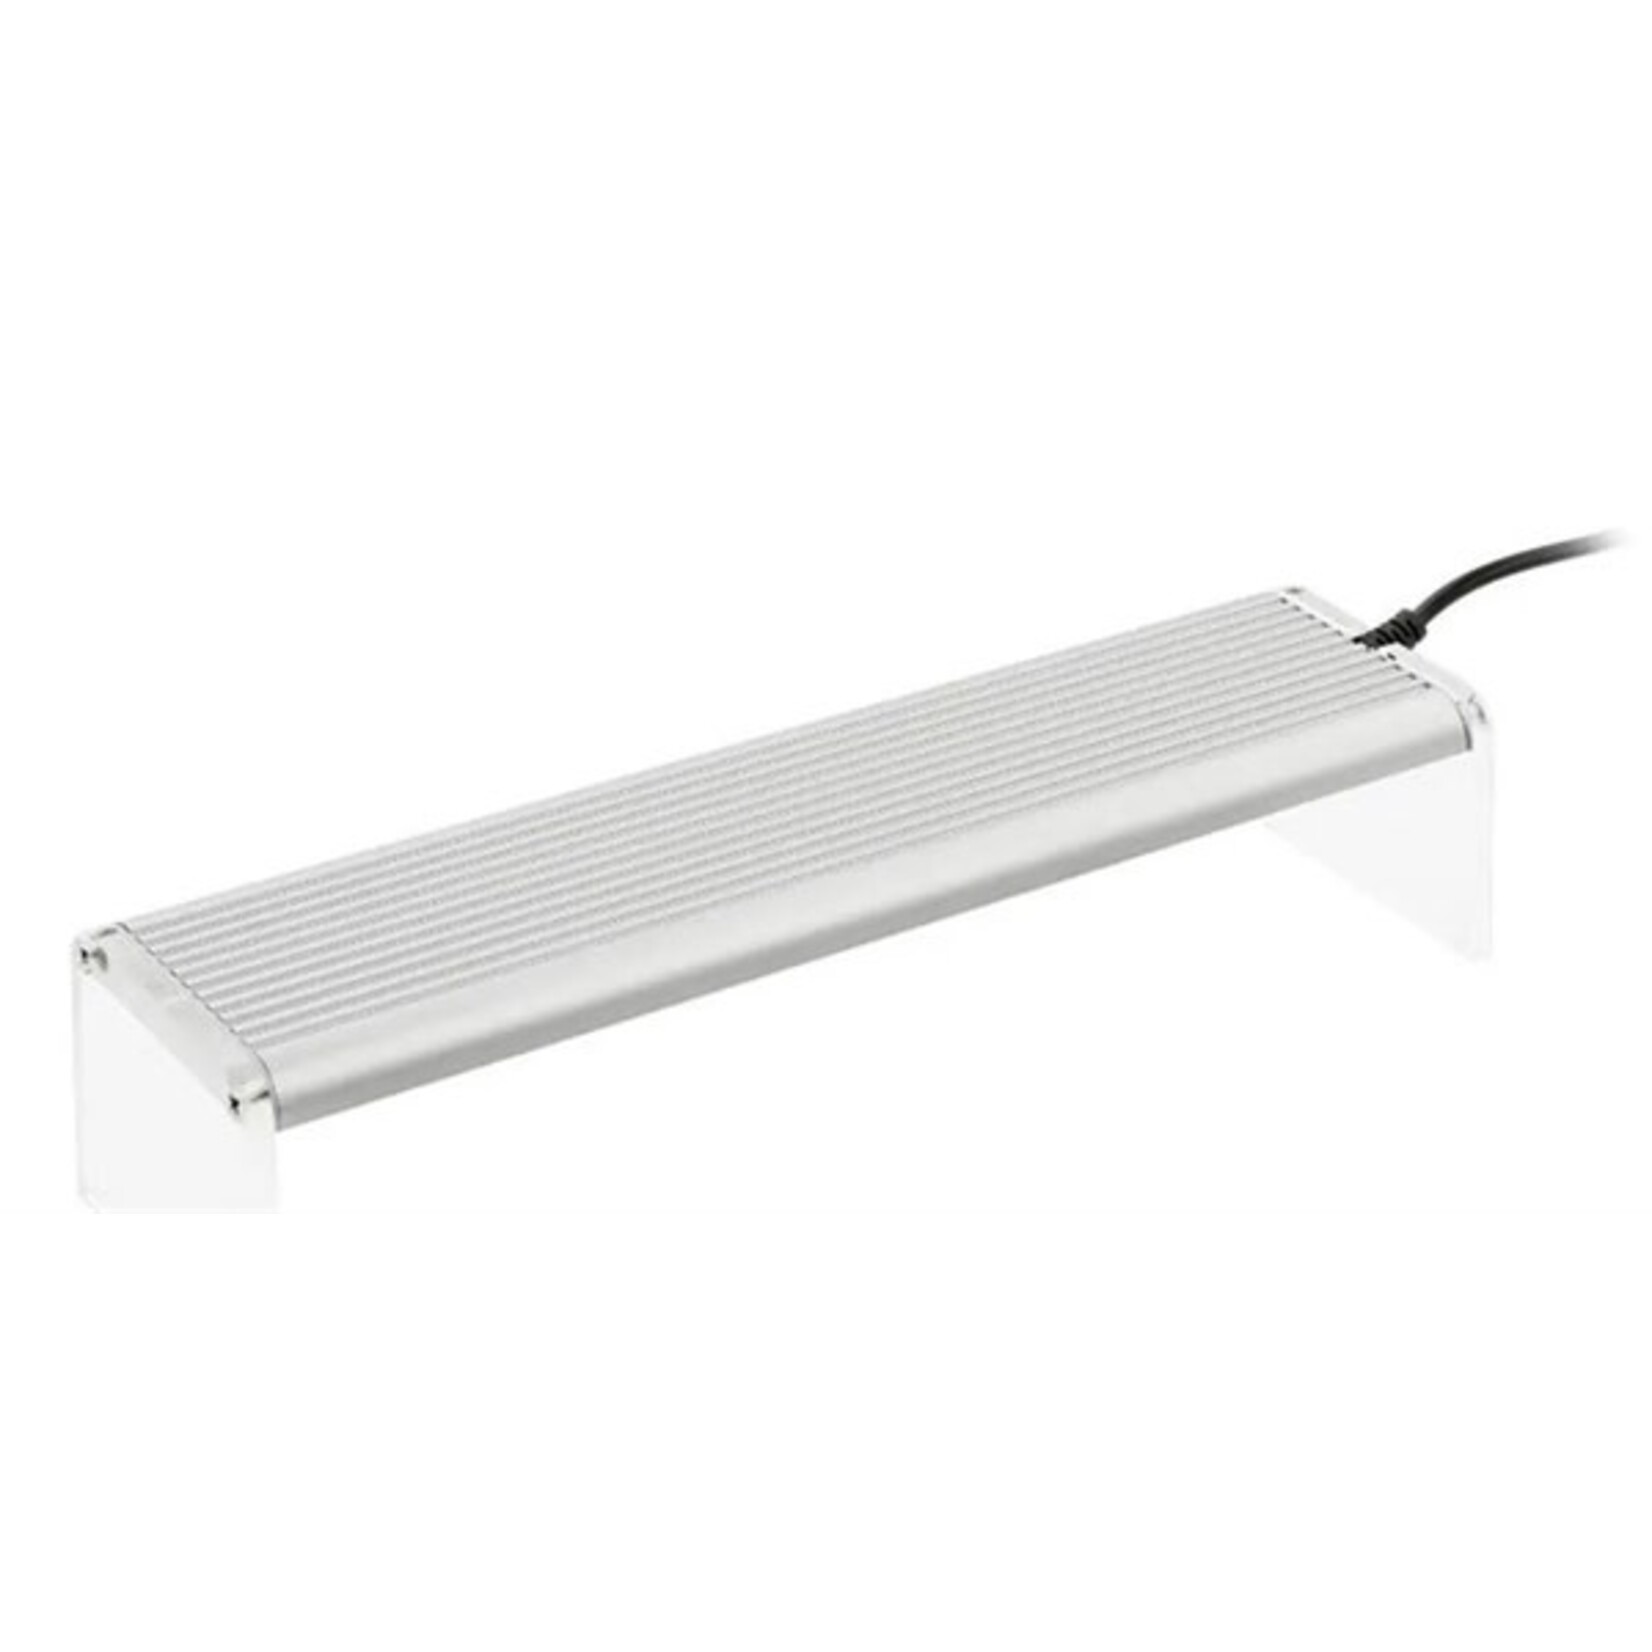 Chihiros A LED A801 80 cm 50w - incl. Duitse trafo